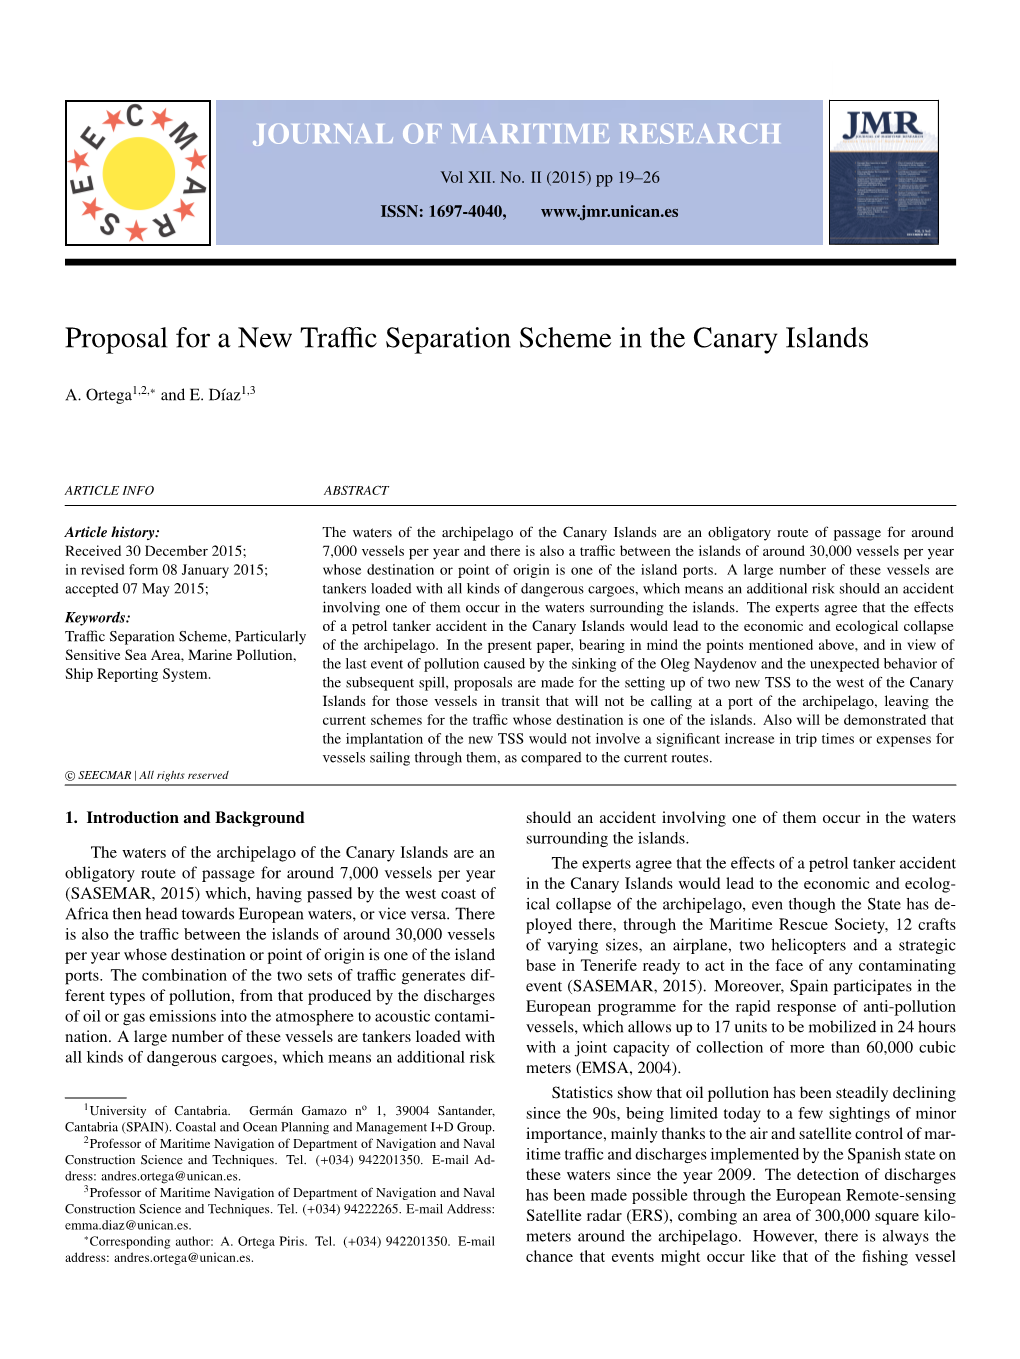 Proposal for a New Traffic Separation Scheme in the Canary Islands